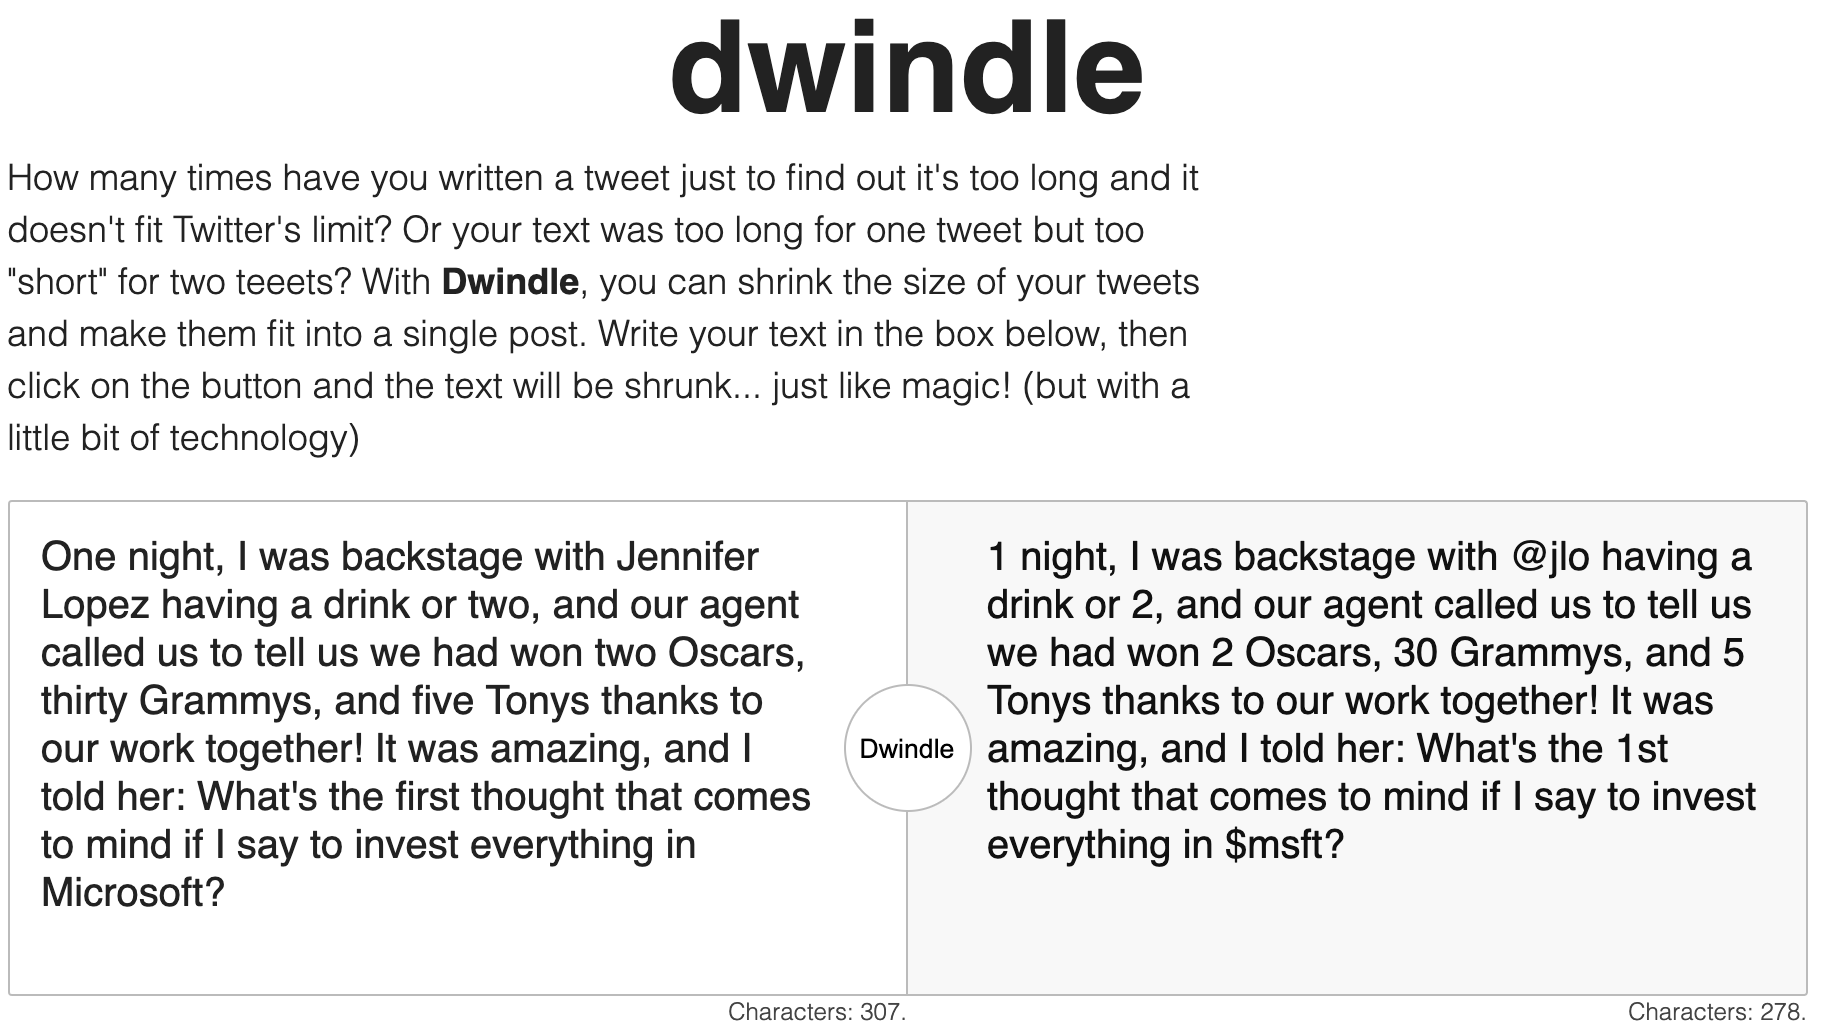 Screenshot of dwindle after replacing some text, the translated part is plain text